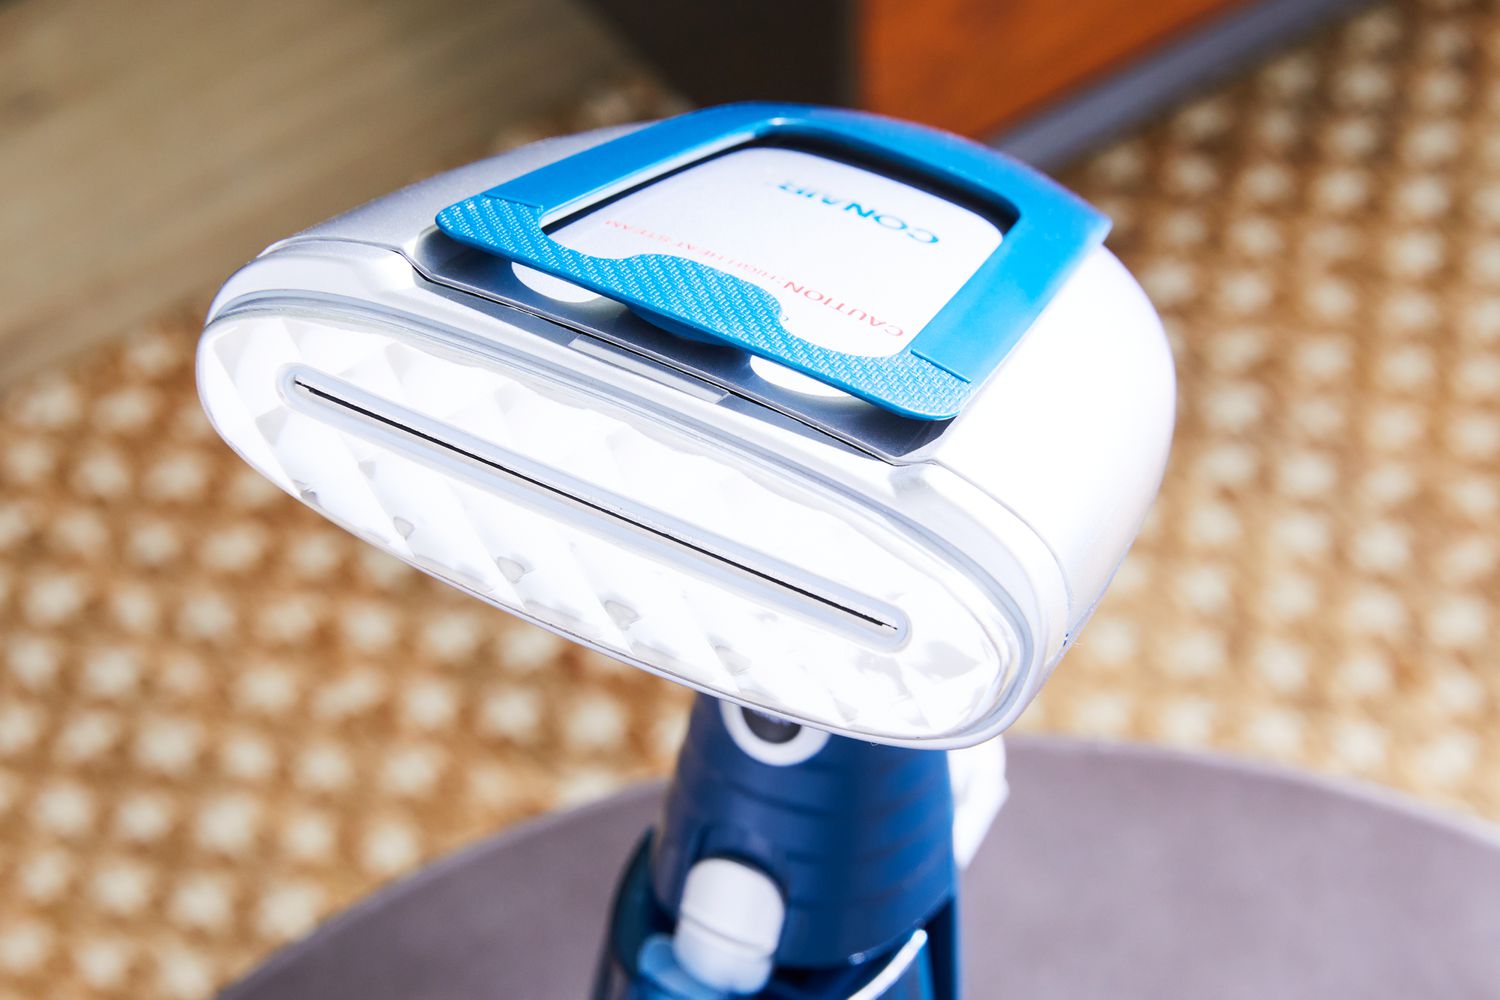 Close-up of where steam comes out on the Conair GS38R Handheld Garment Steamer.